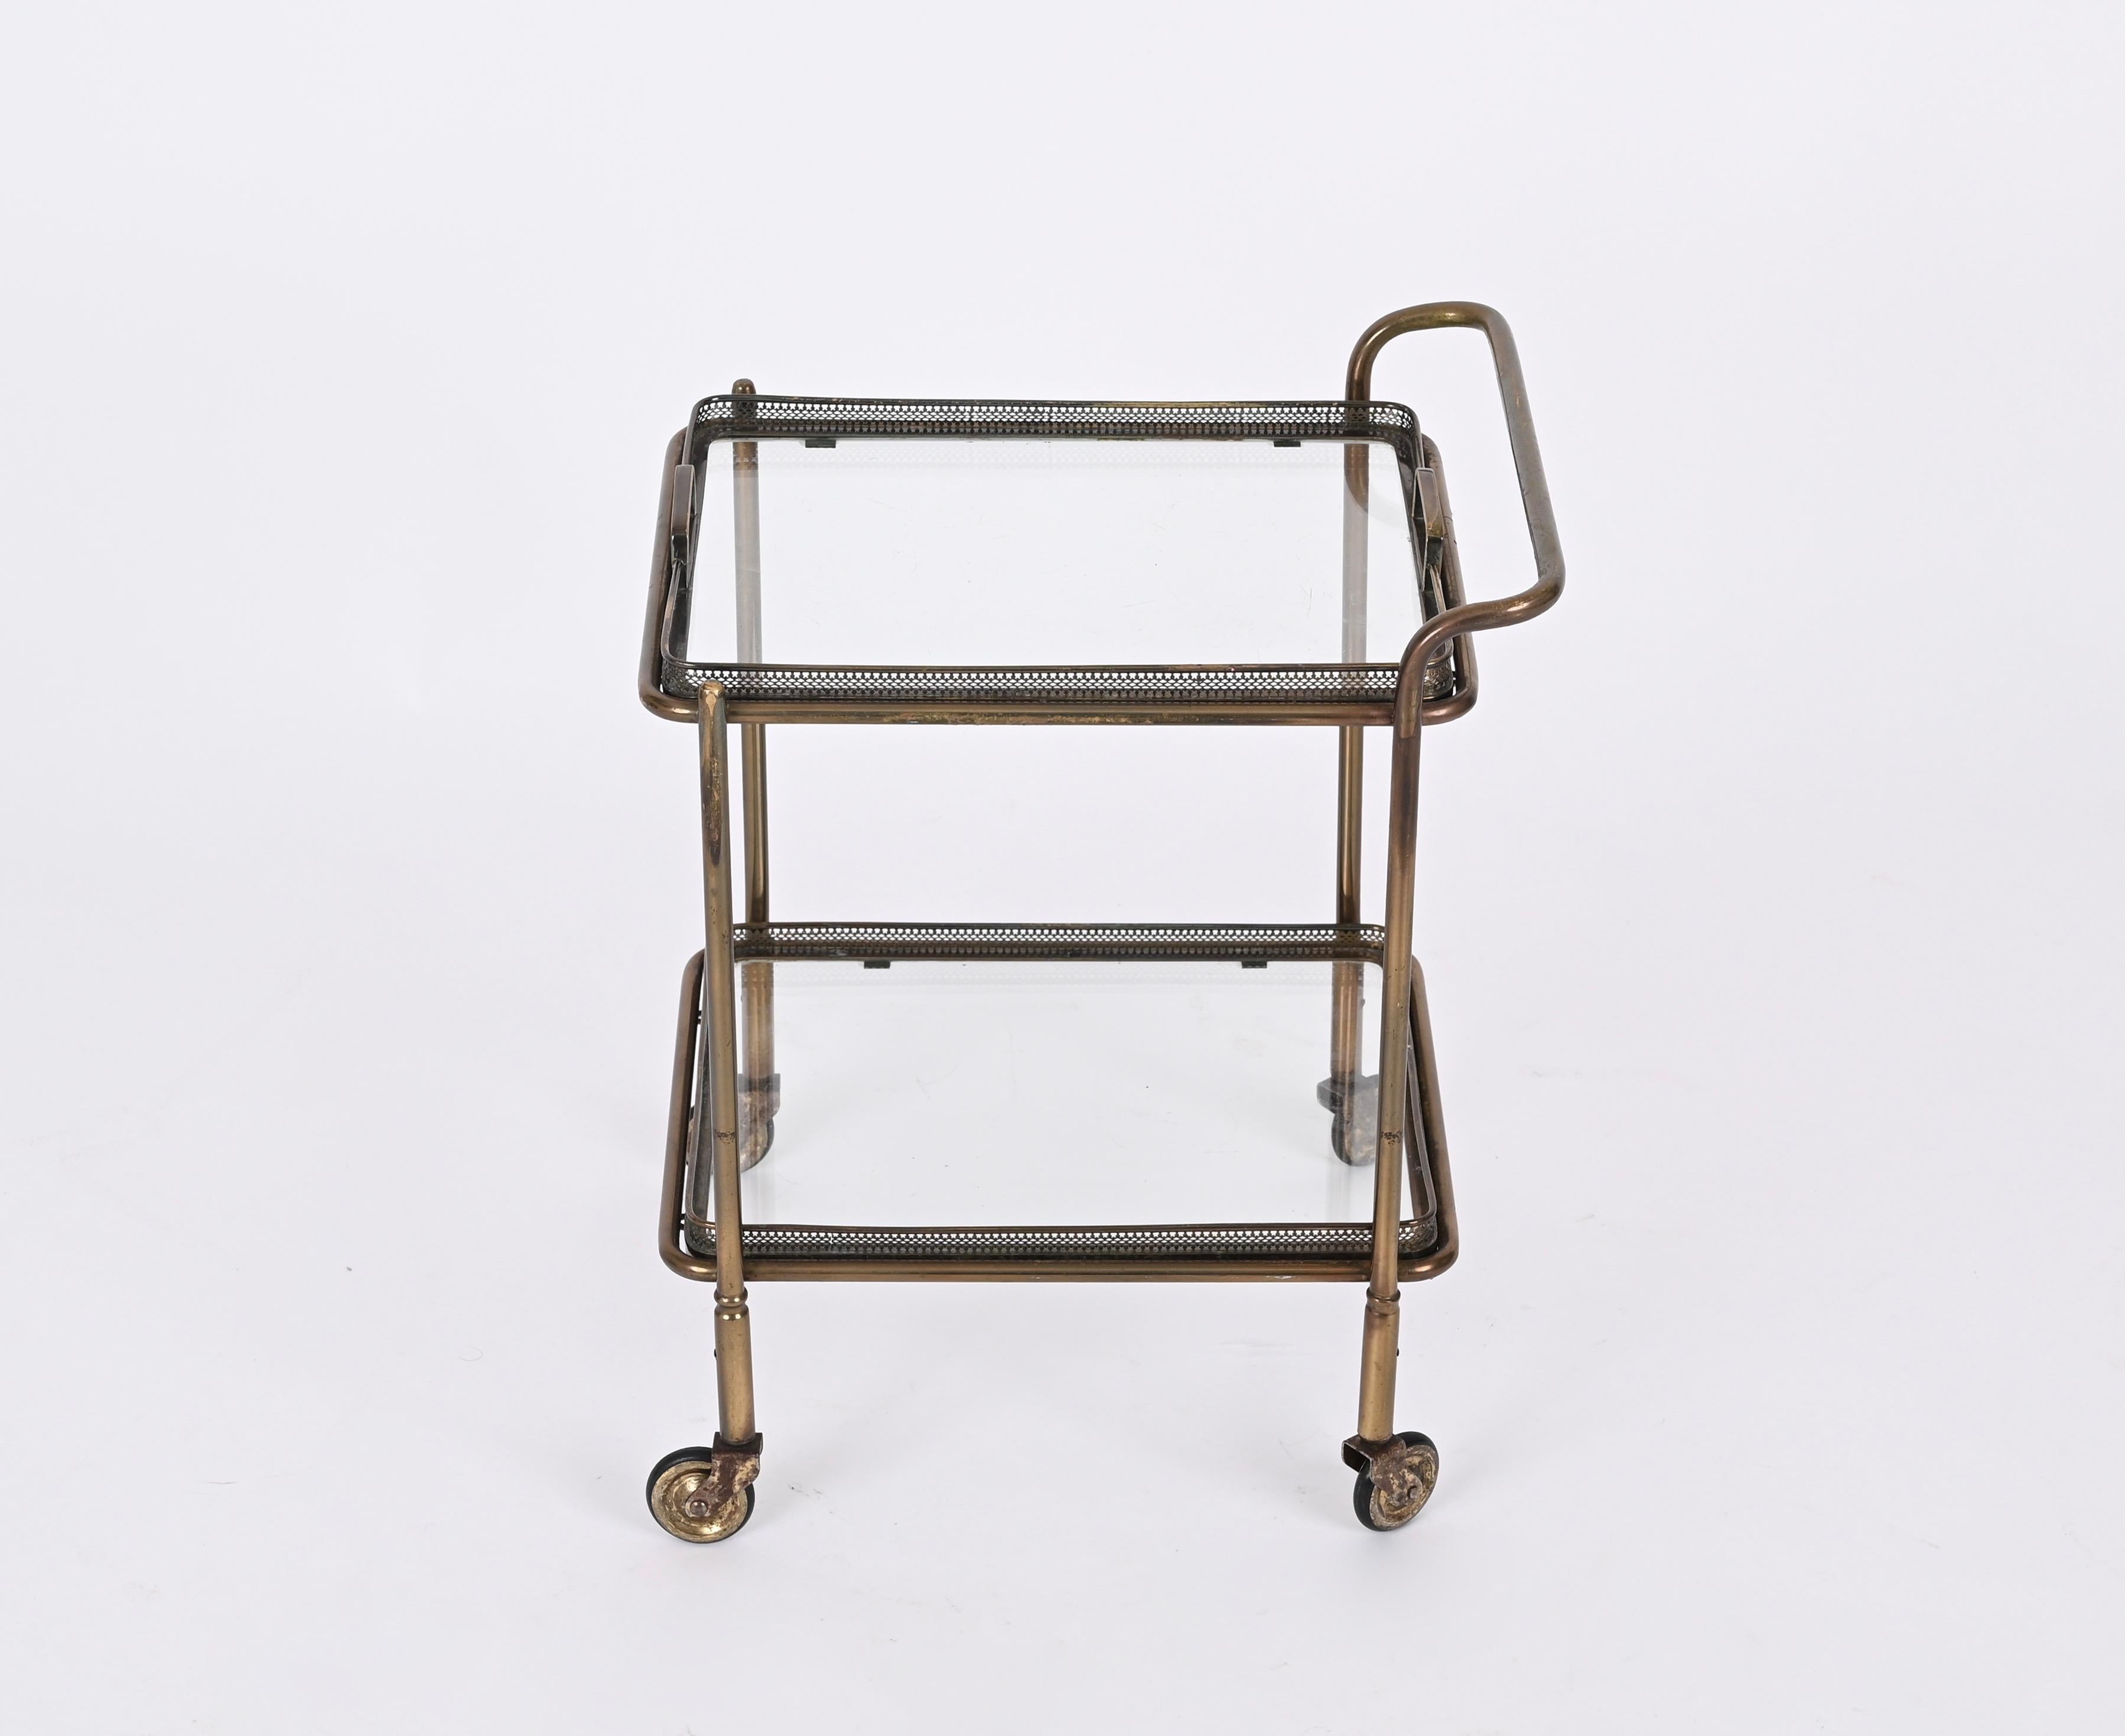 Maison Jansen Midcentury Brass and Crystal French Serving Bar Cart, 1950s For Sale 6